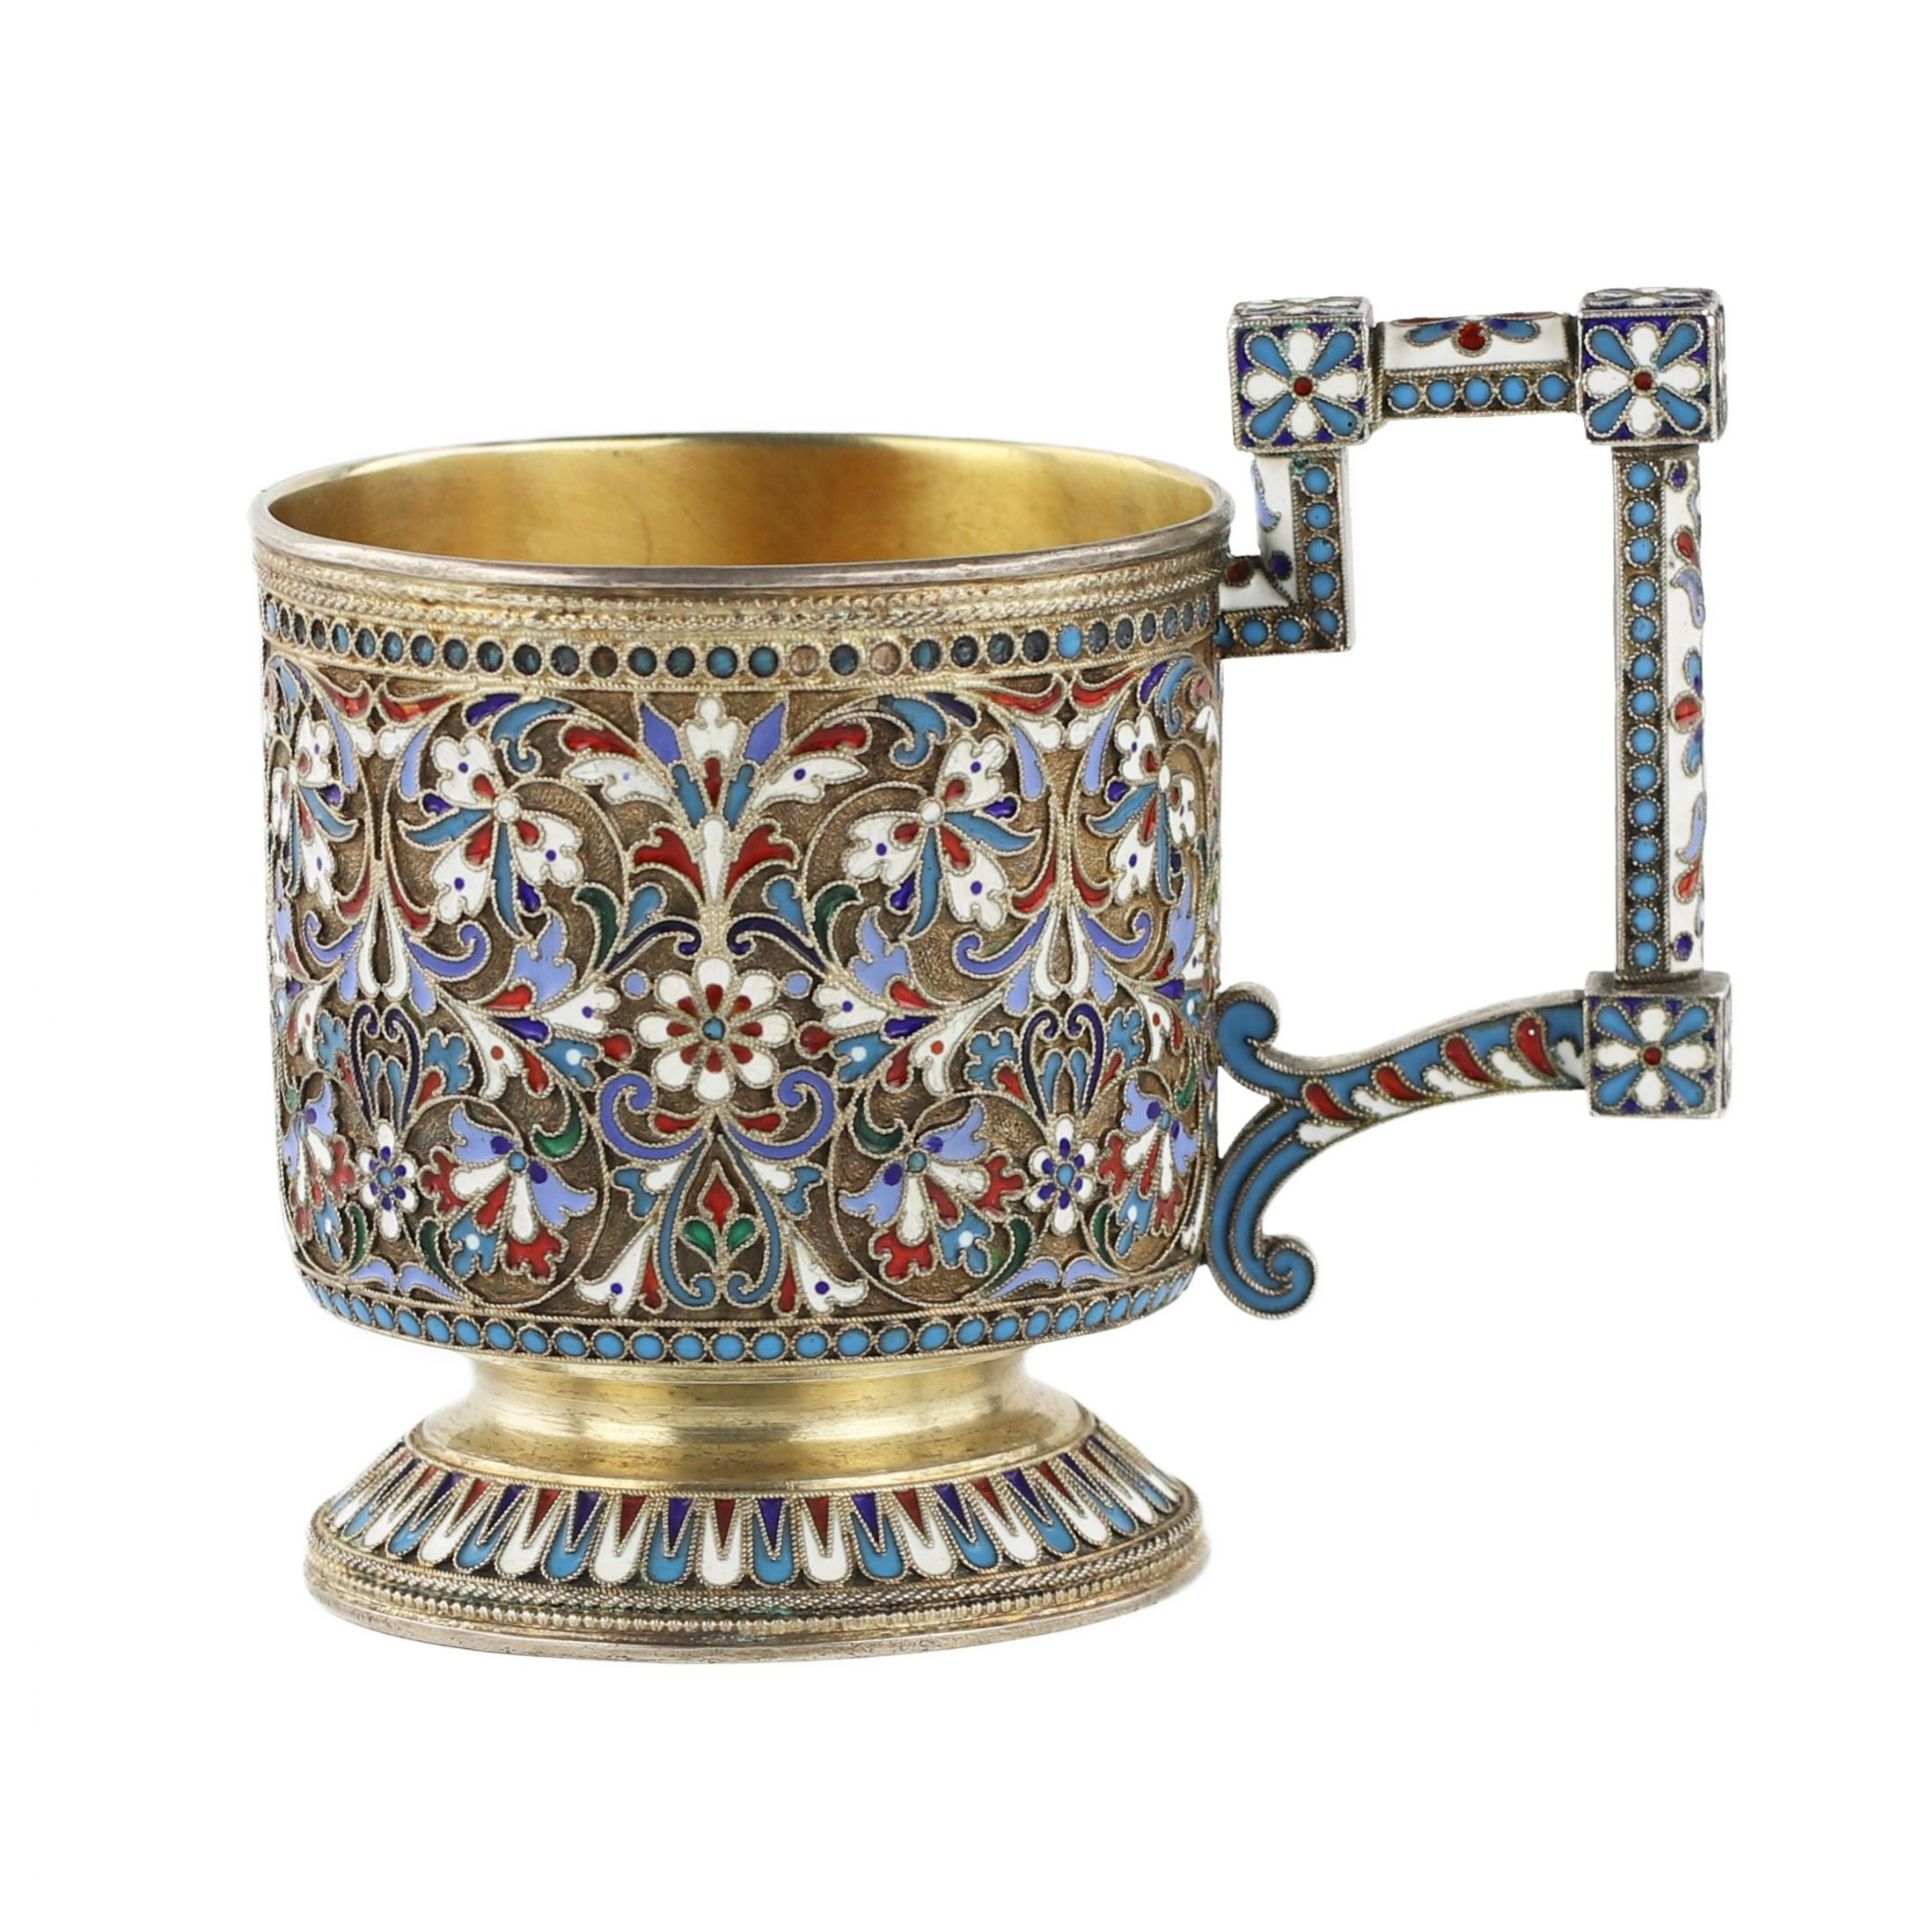 N.V. Alekseev. Silver glass holder in cloisonne enamels. Moscow. The turn of the 19th and 20th cent